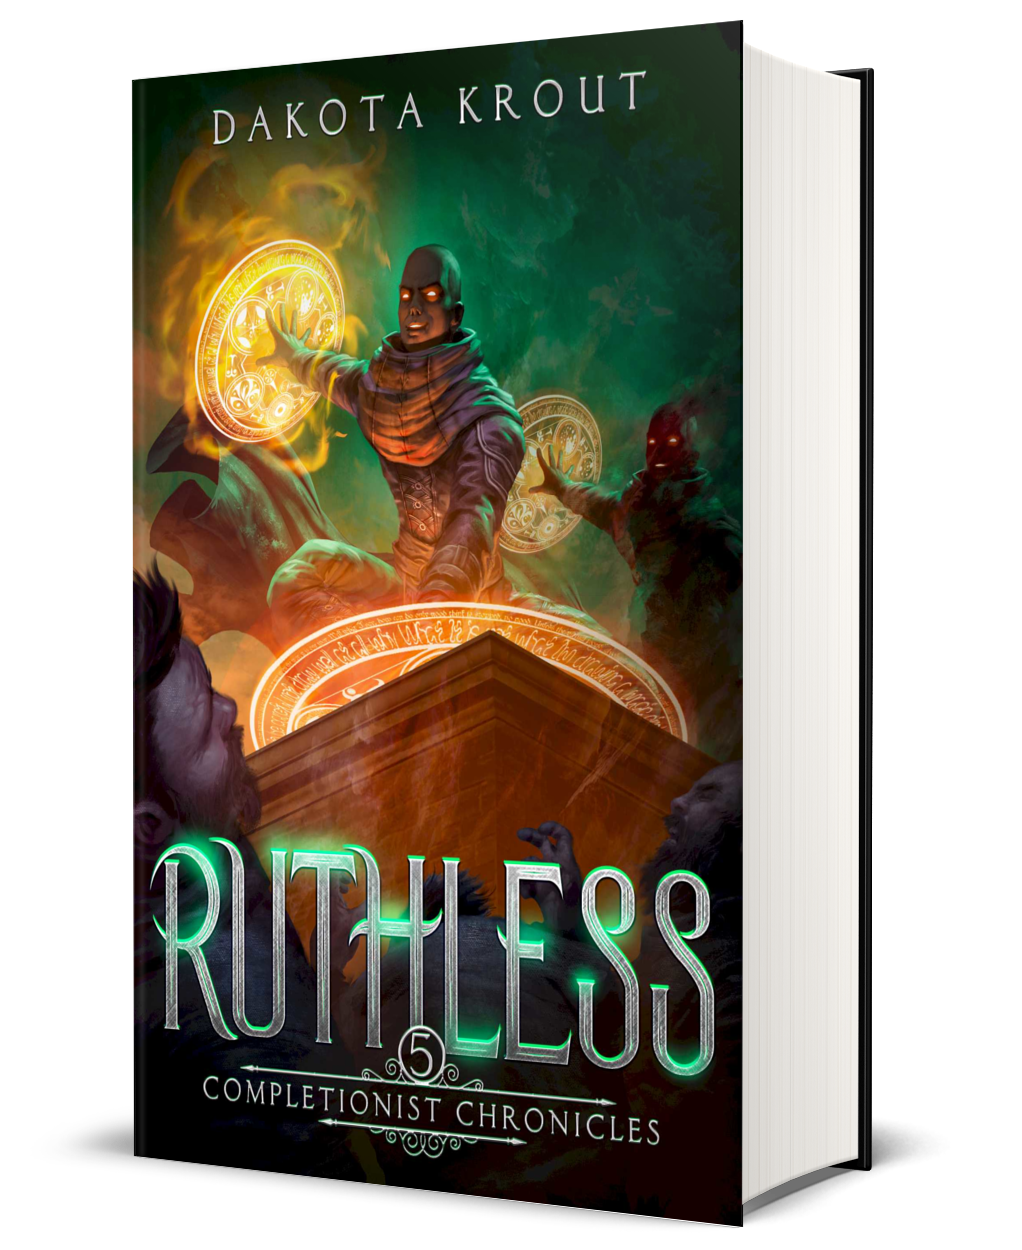 Ruthless Signed Hardcover